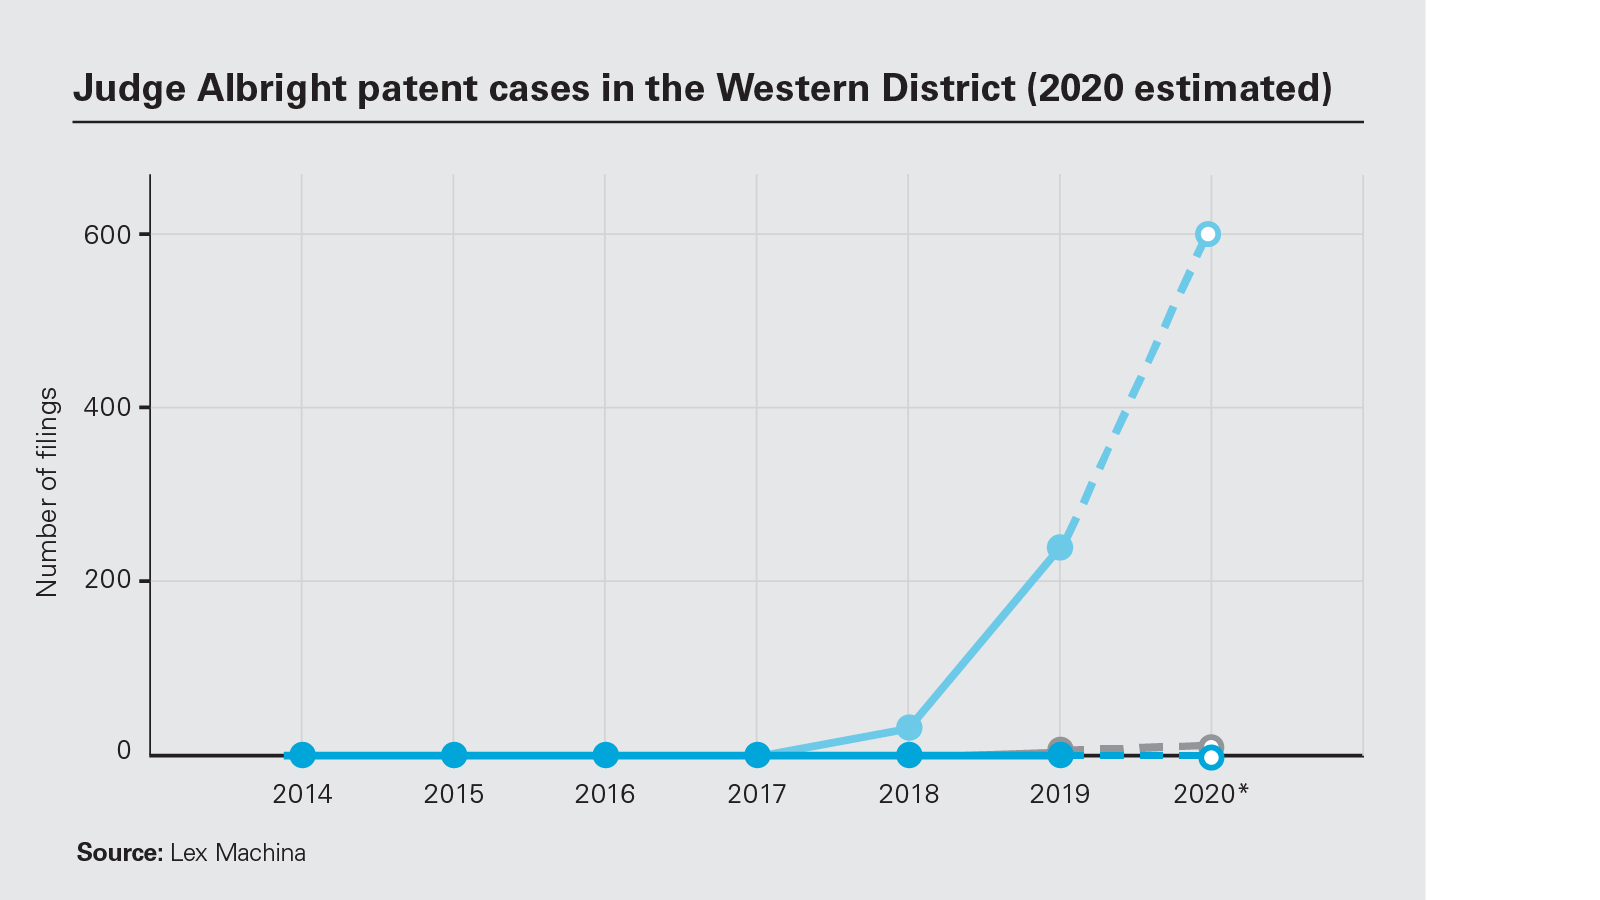 Judge Albright patent cases in the Western District chart